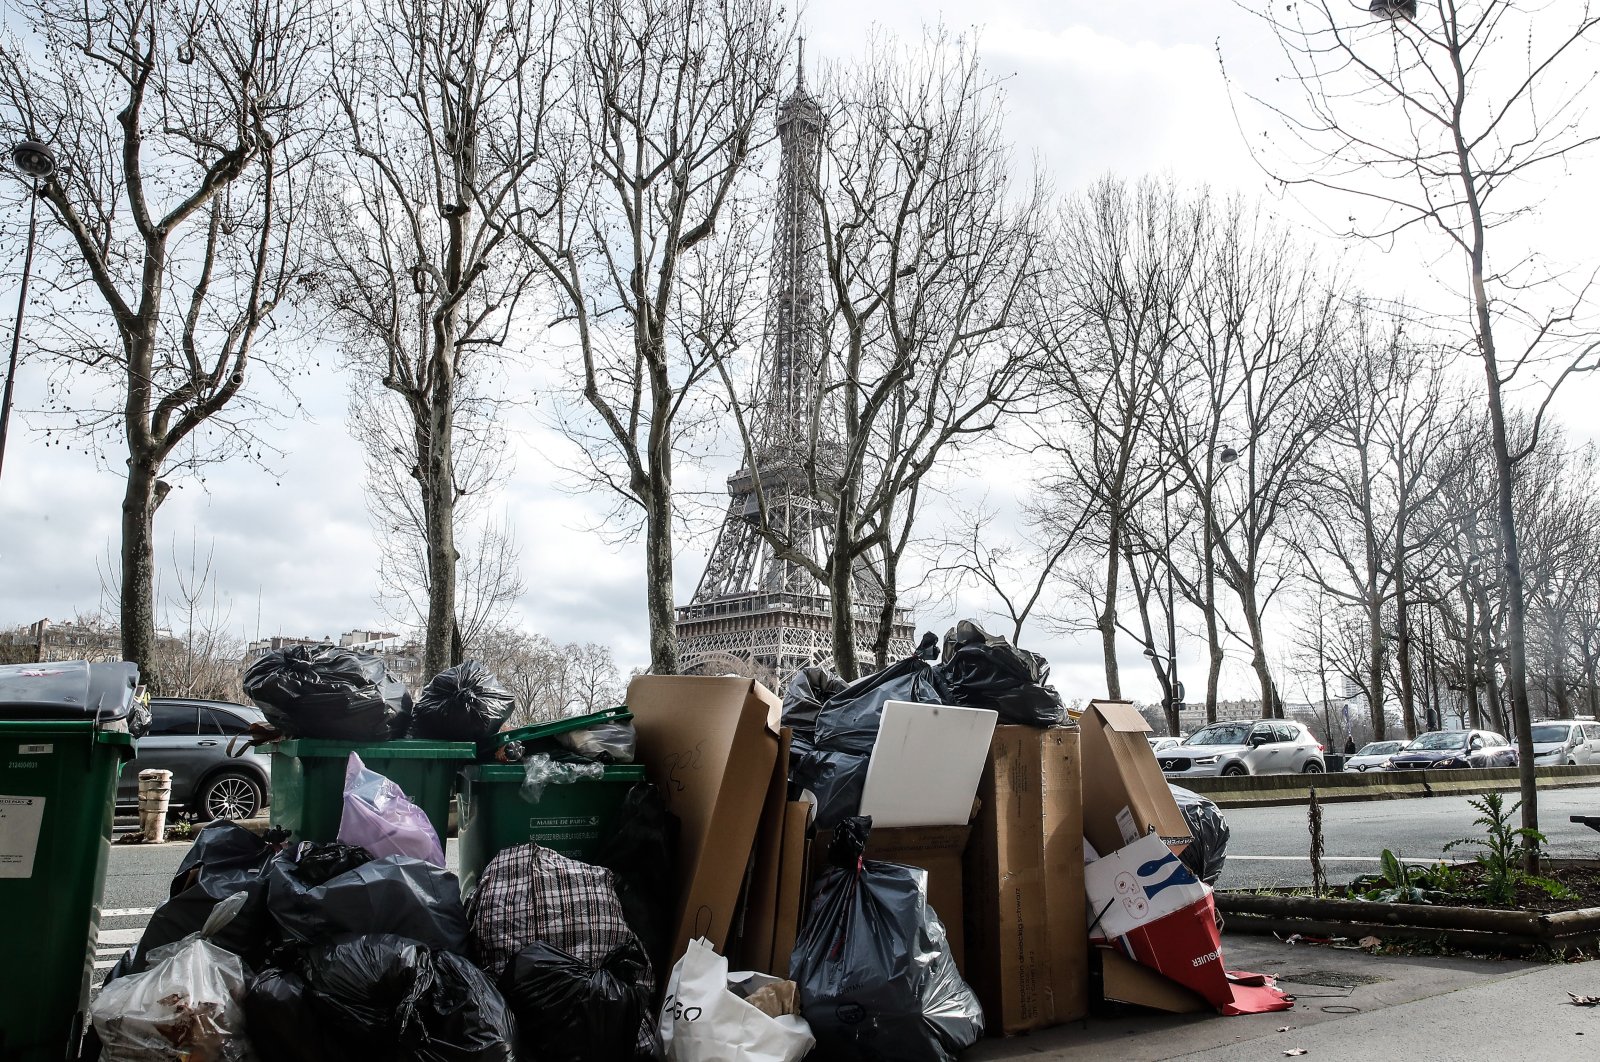 Garbage cans overflowing with trash in Paris, France, March 12, 2023 (EPA Photo)